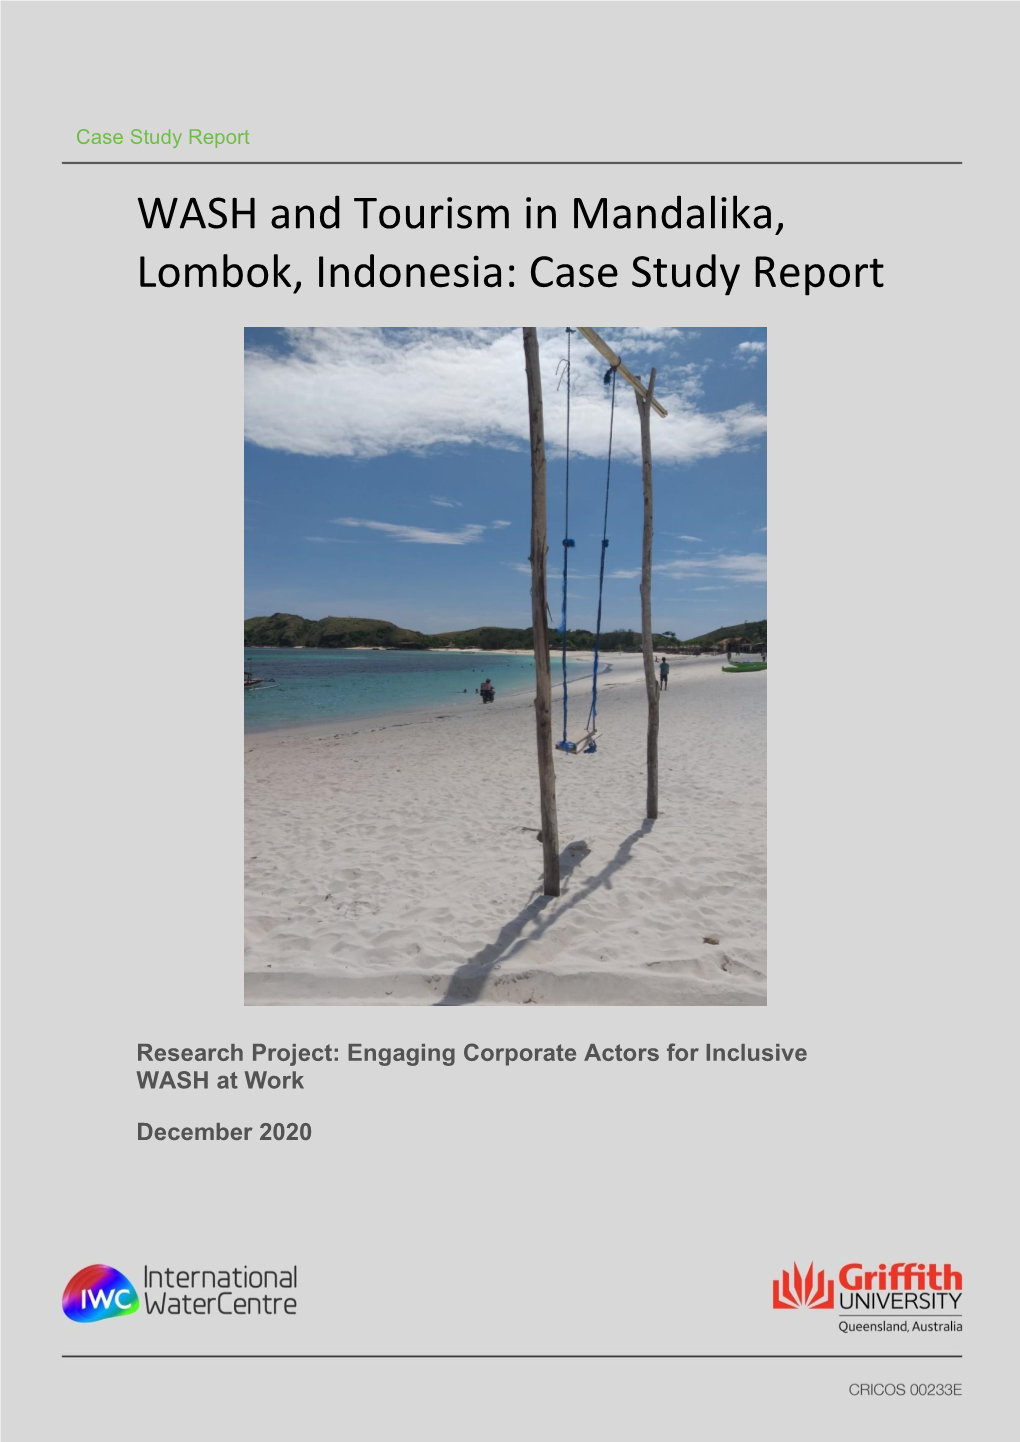 WASH and Tourism in Mandalika, Lombok, Indonesia: Case Study Report